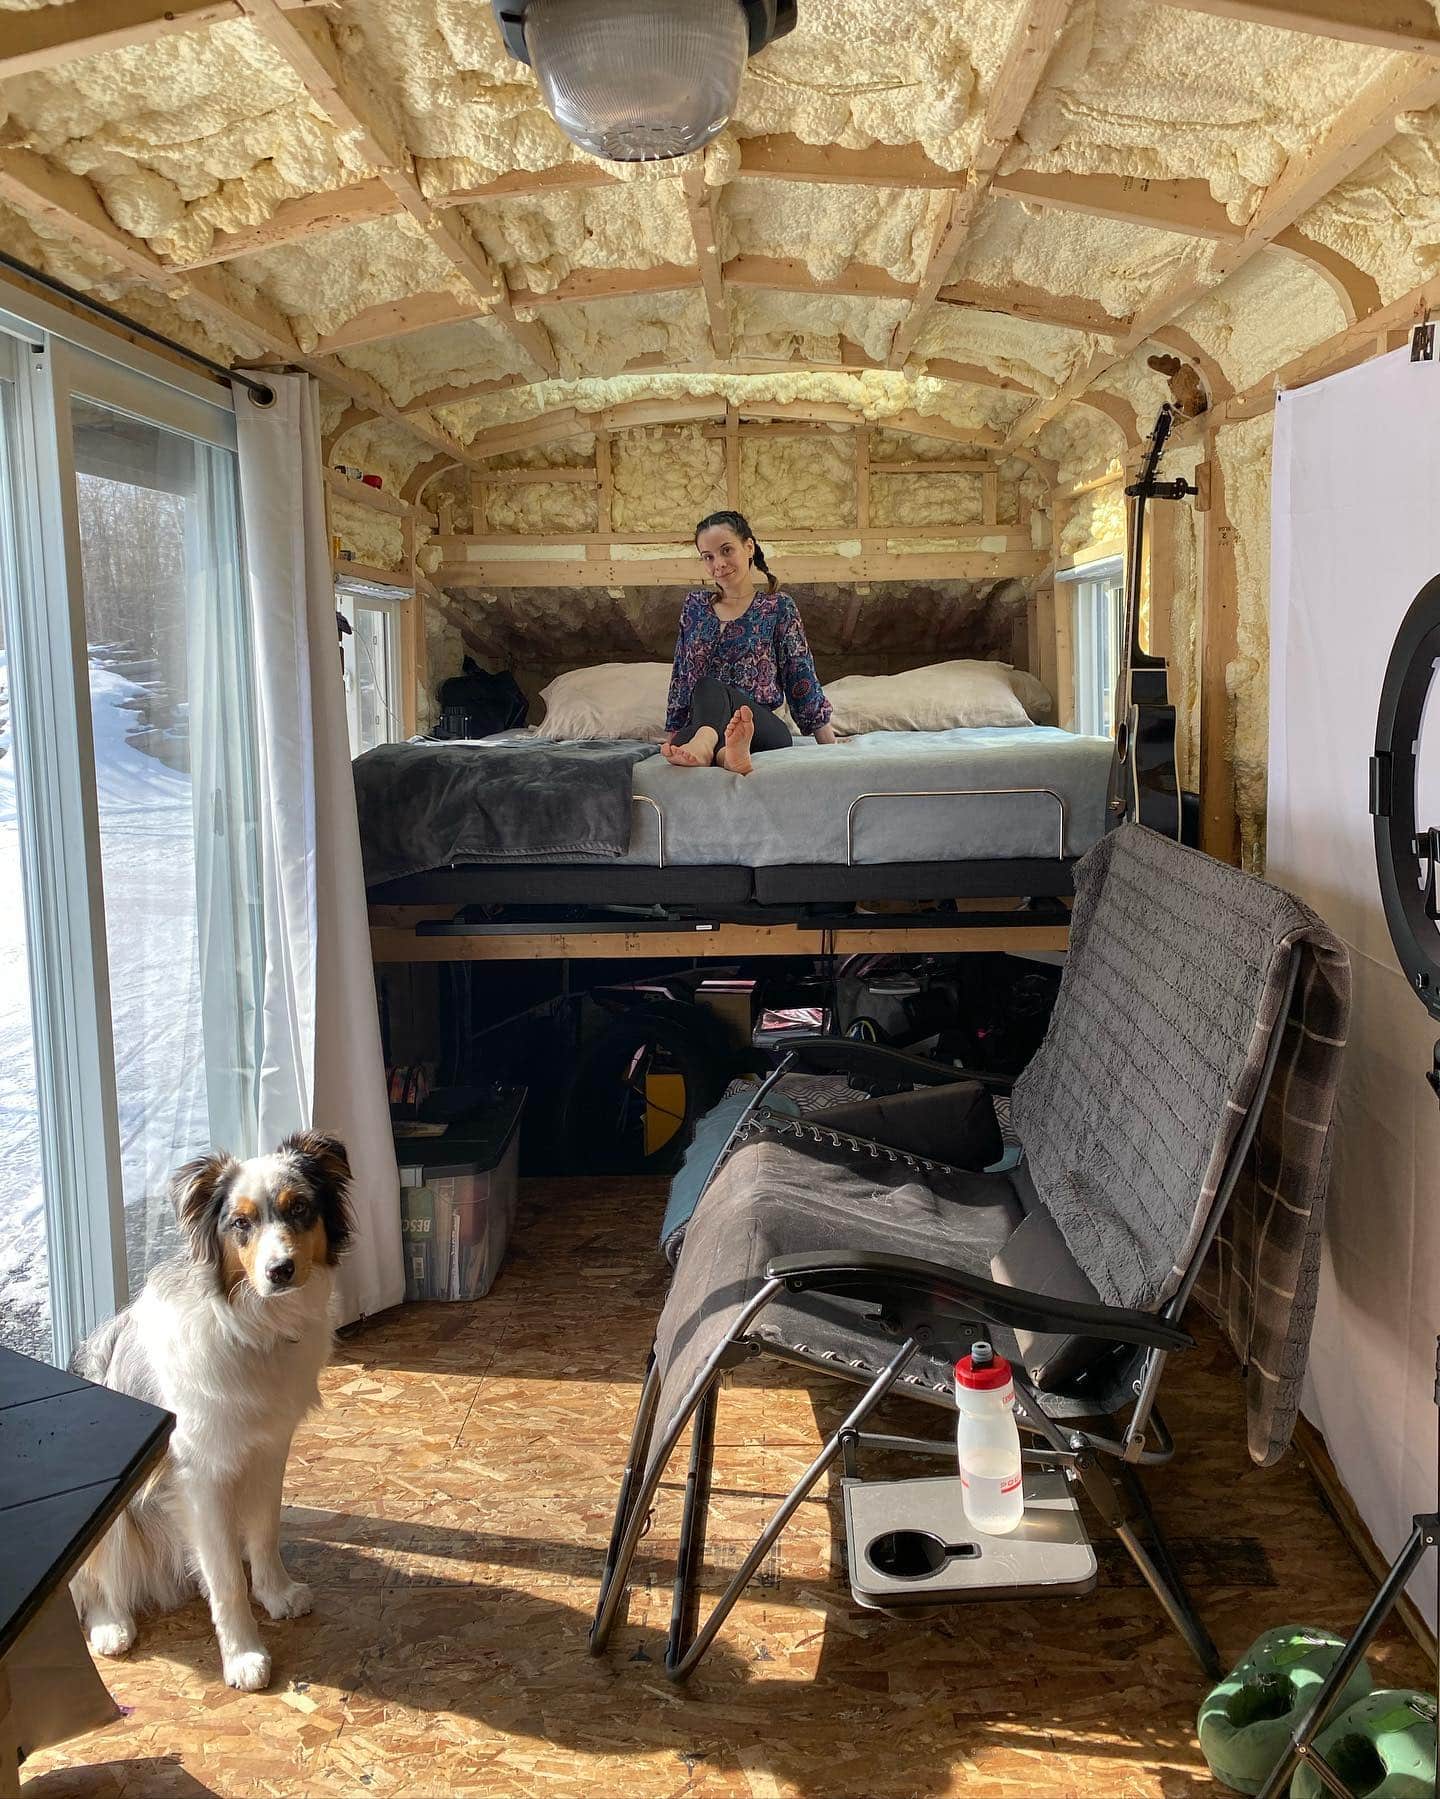 Not a Regular Skoolie's Gabi sitting on the bed in their skoolie while their dog sits on the floor